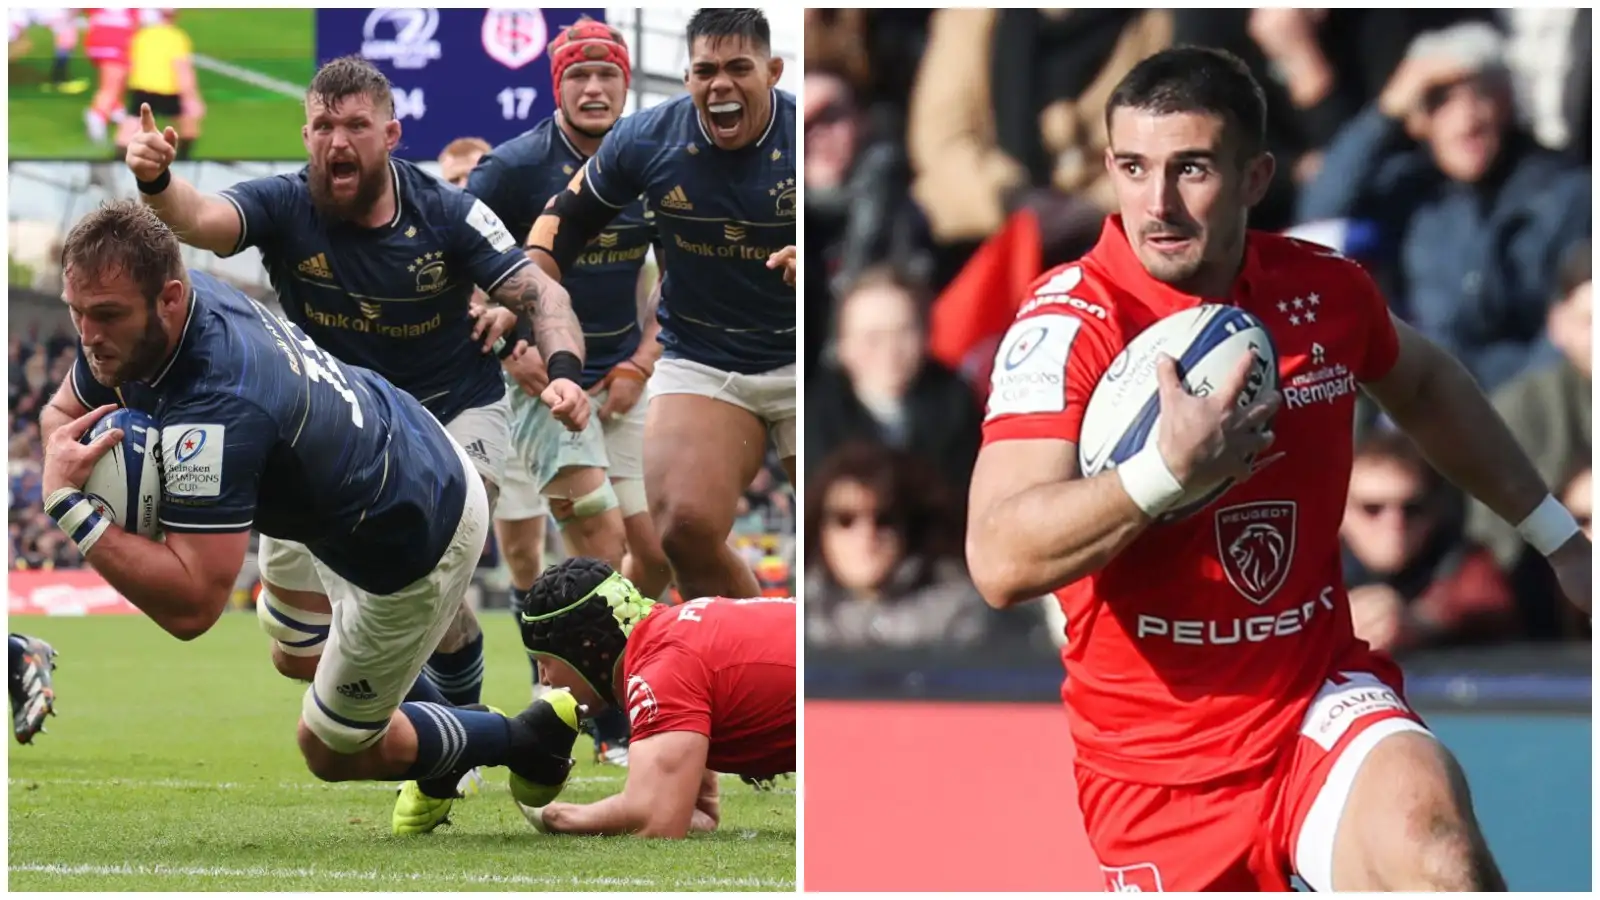 Leinster and Toulouse split